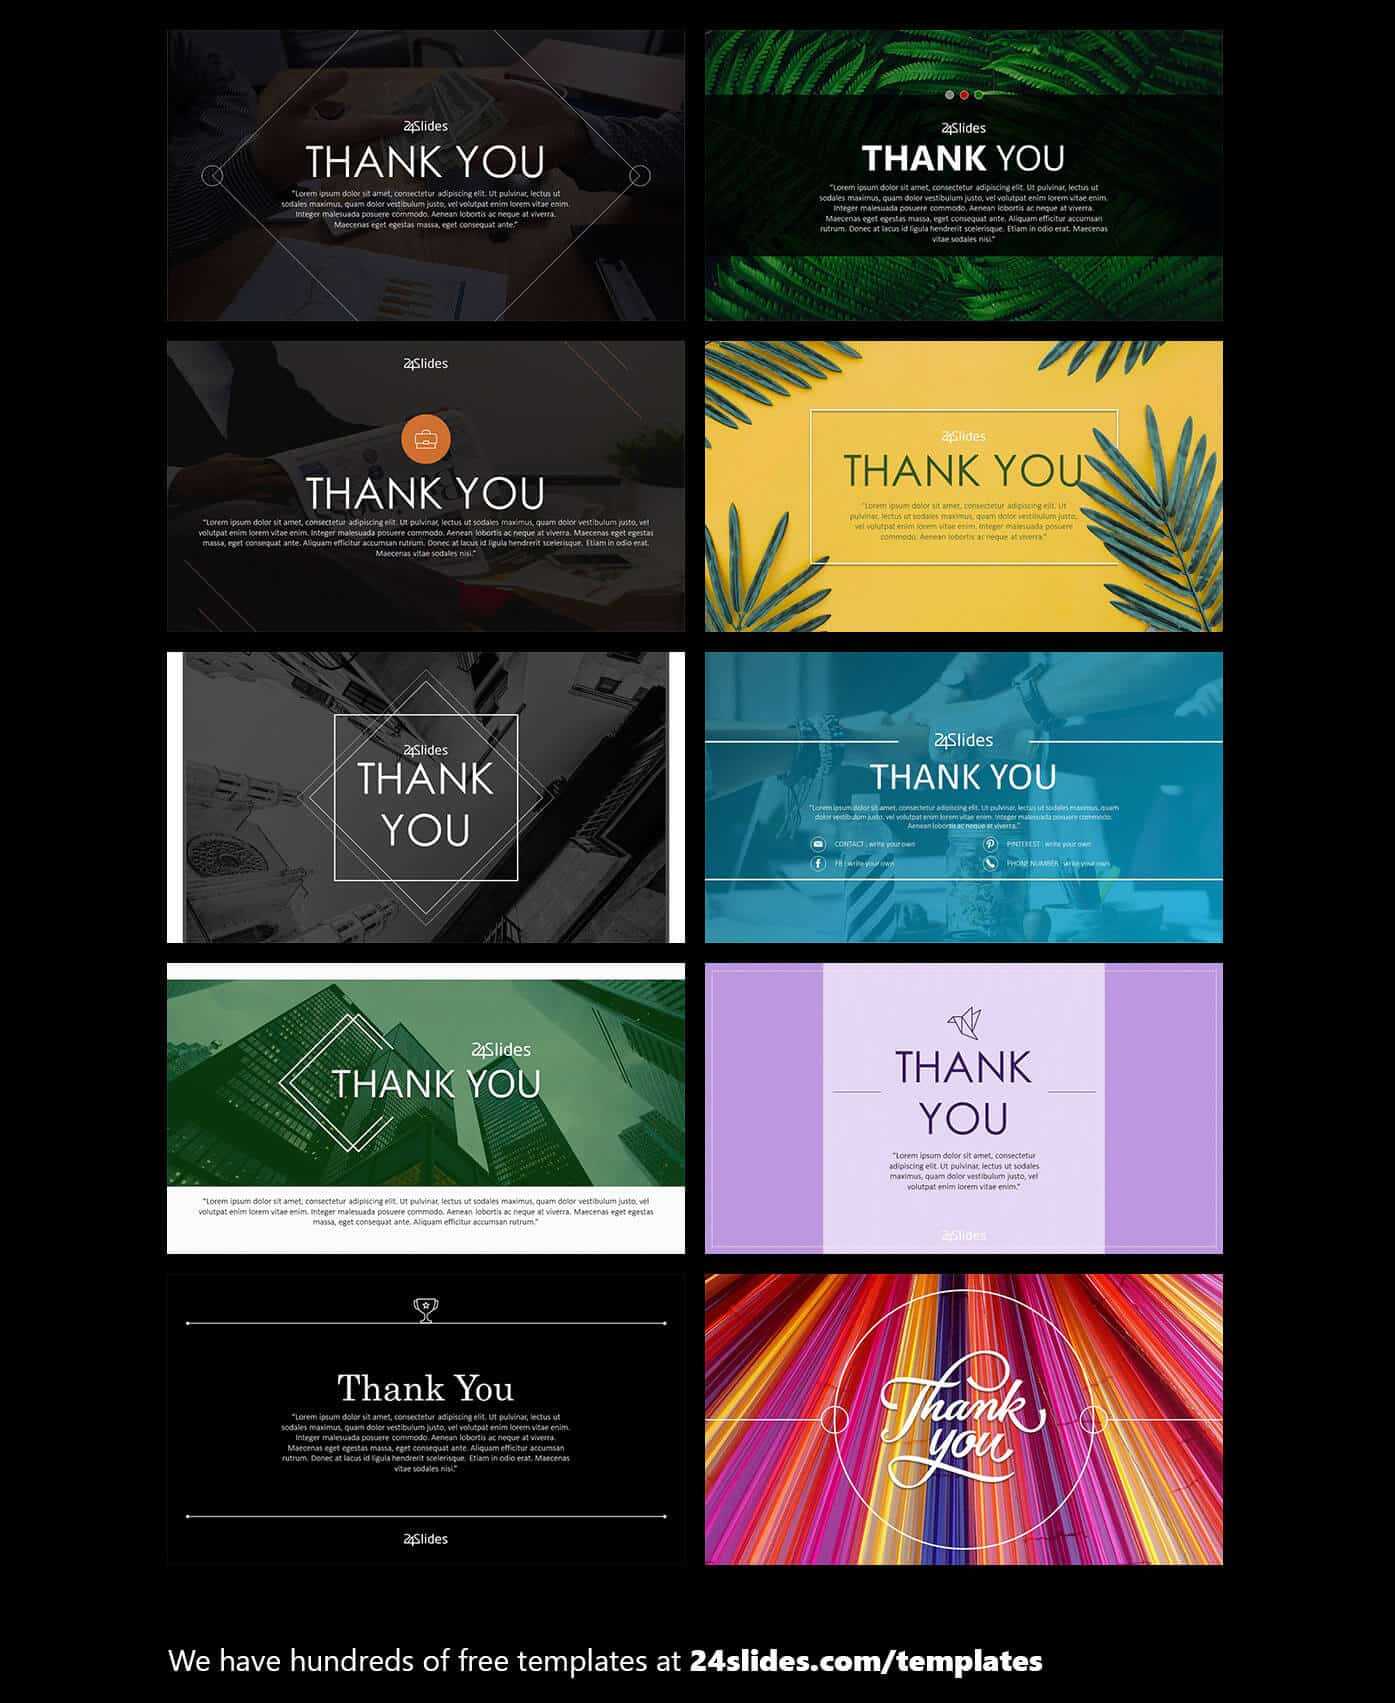 15 Fun And Colorful Free Powerpoint Templates | Present Better With Regard To Powerpoint Photo Slideshow Template